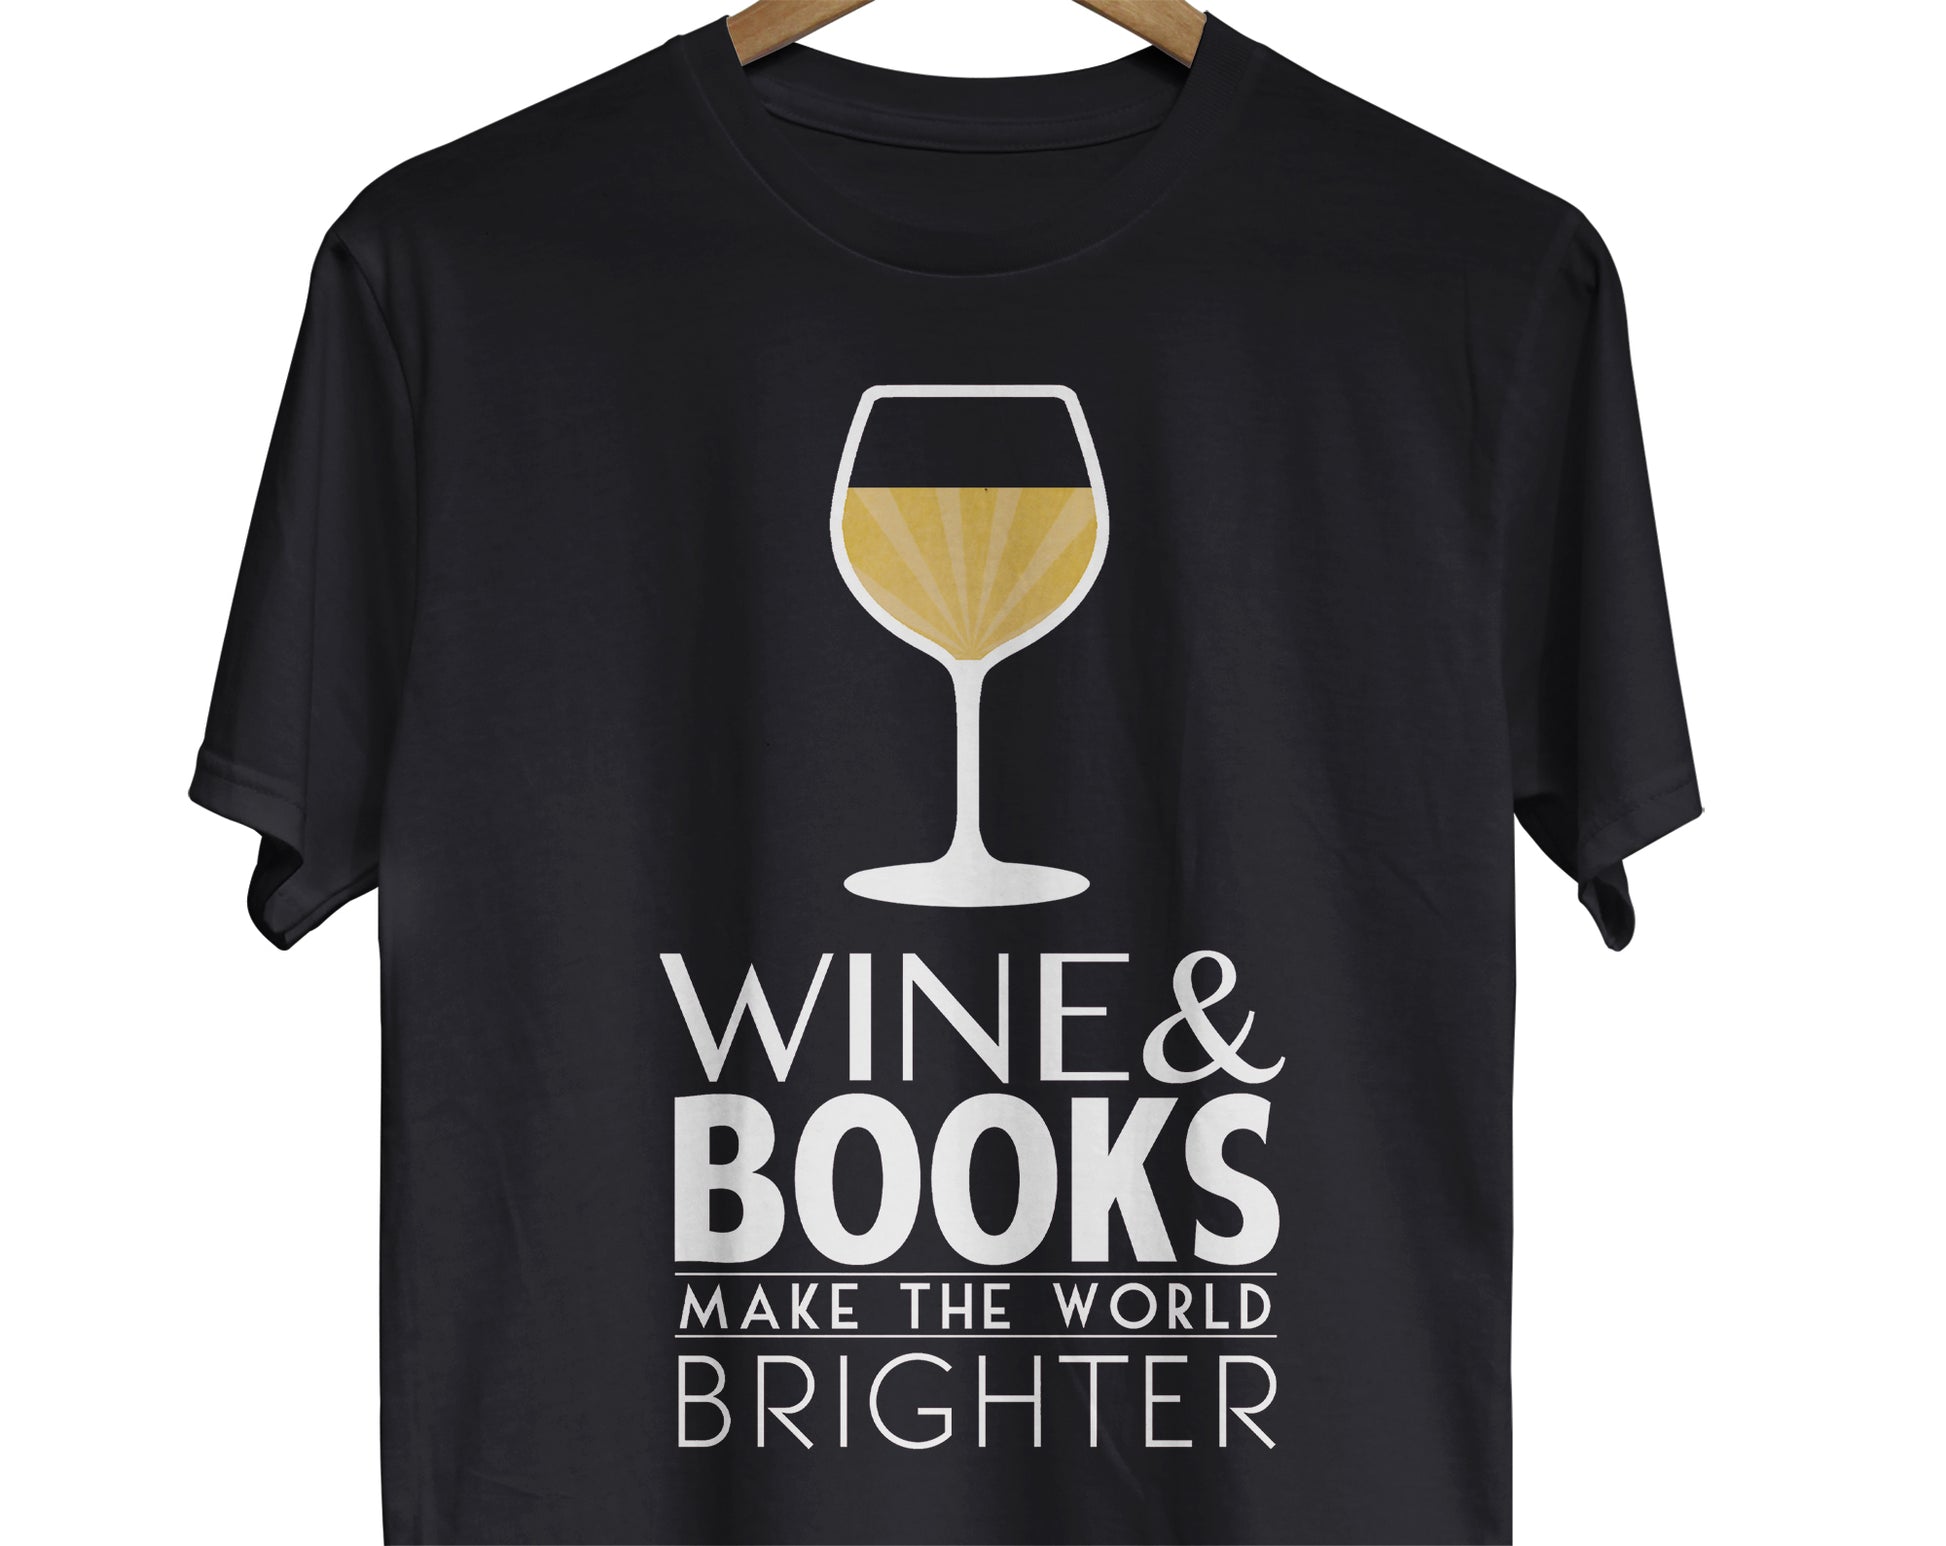 Wine & Books Make the World Better T-shirt for bookworms and winery lovers